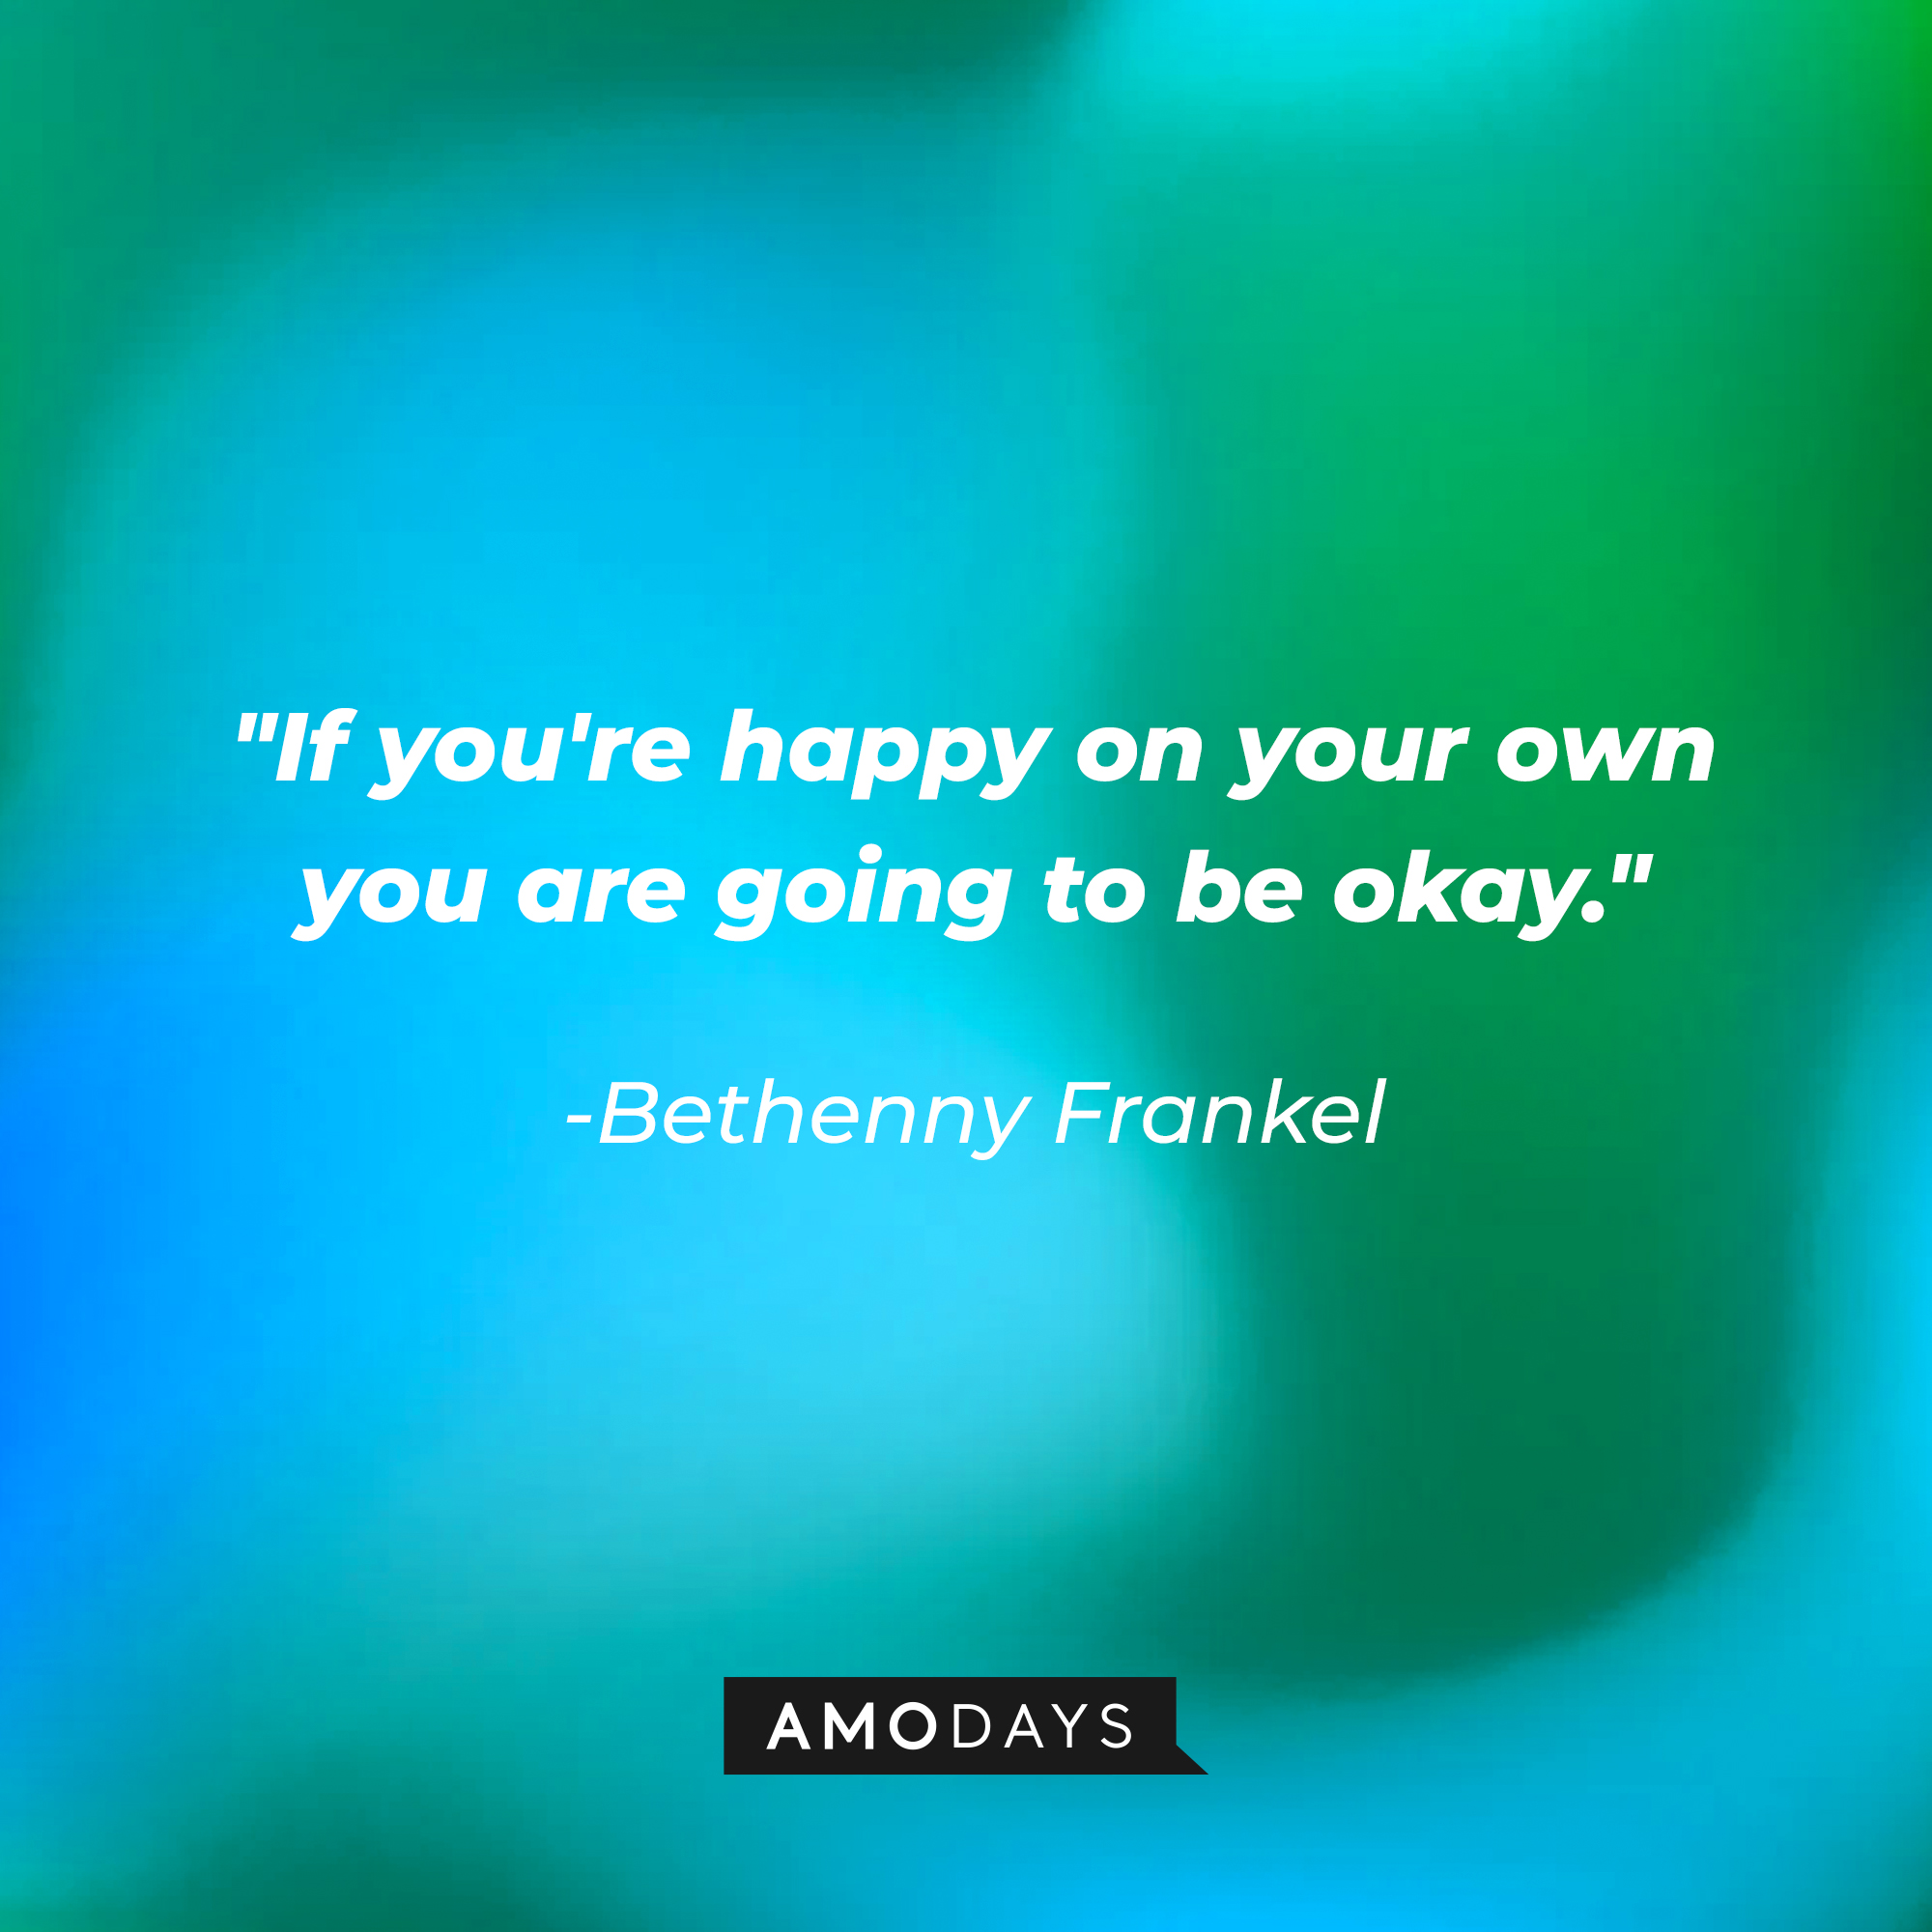 Bethenny Frankel's quote: "If you're happy on your own you are going to be okay." | Source: Amodays